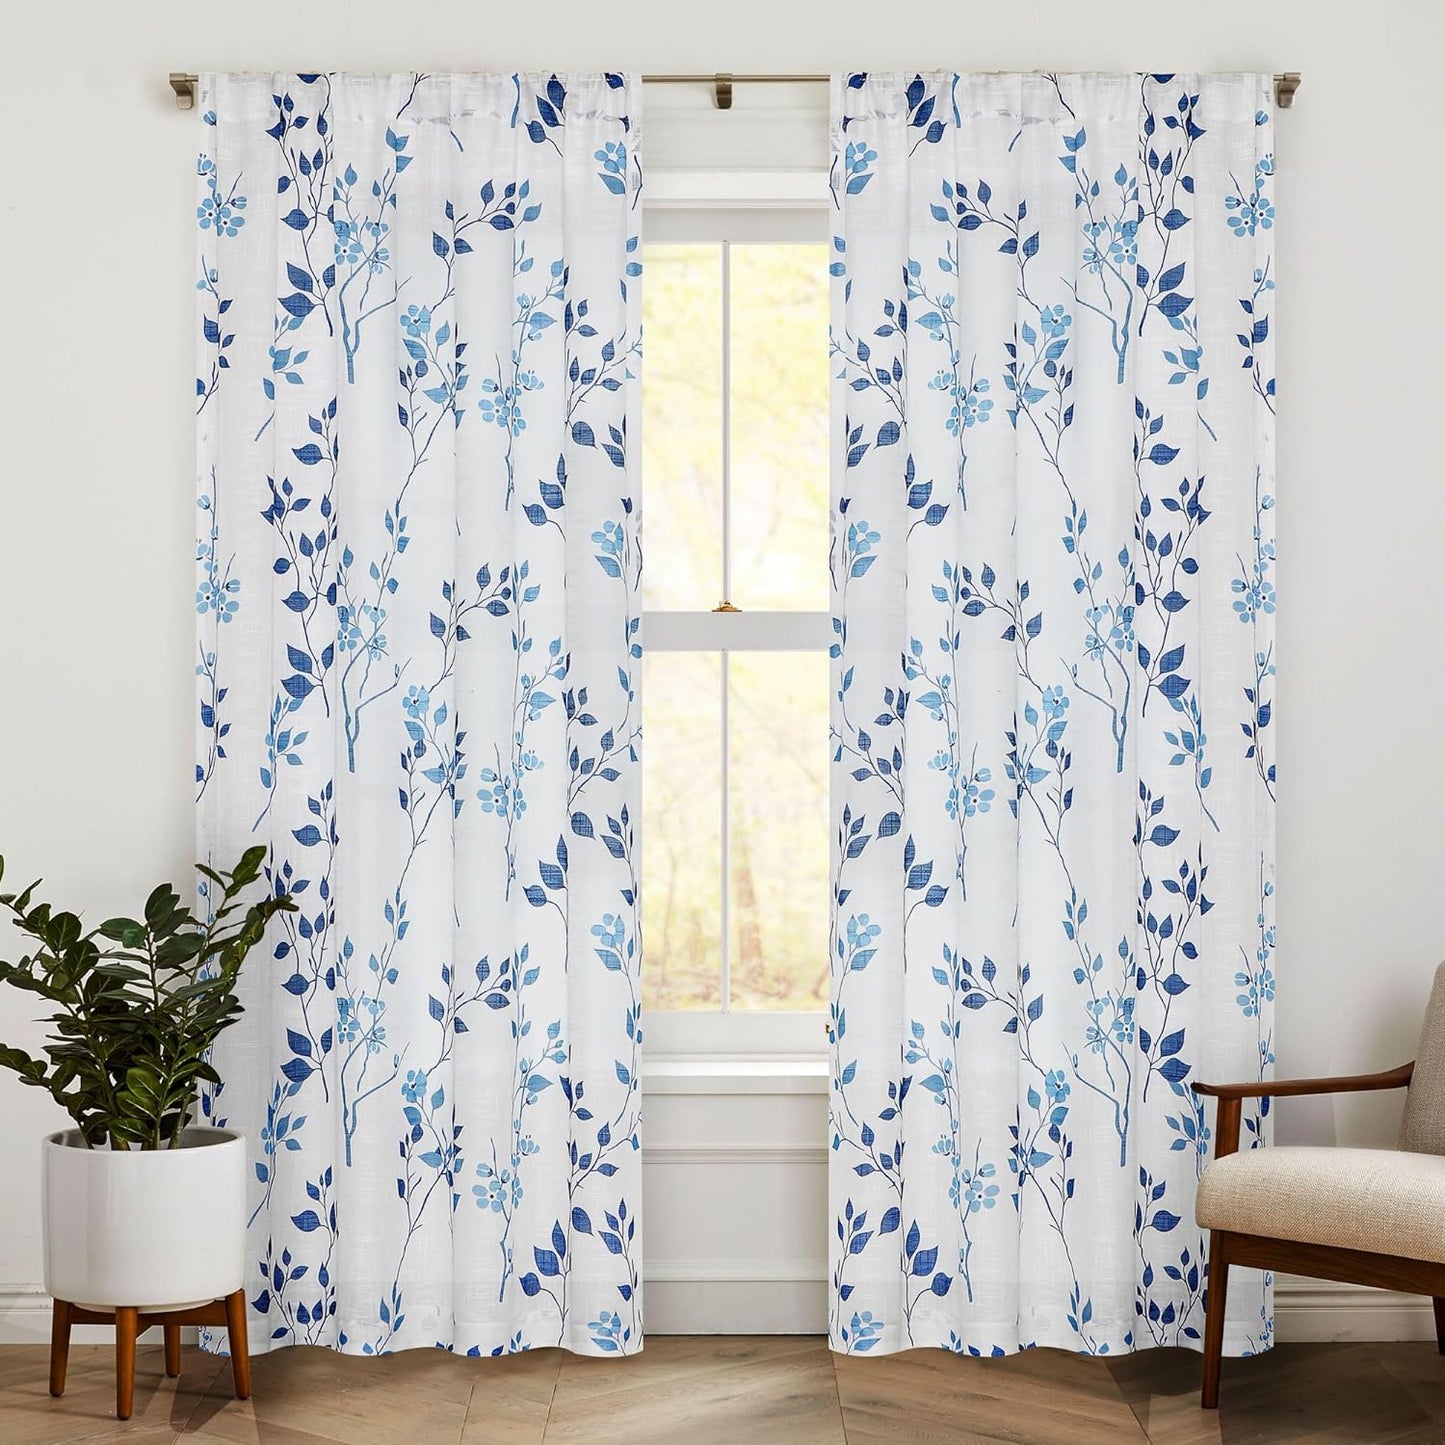 Beauoop Floral Semi Sheer Curtains 84 Inch Long for Living Room Bedroom Farmhouse Botanical Leaf Printed Rustic Linen Texture Panel Drapes Rod Pocket Window Treatment,2 Panels,50 Wide,Yellow/Gray  Beauoop Blue/Navy 50"X108"X2 